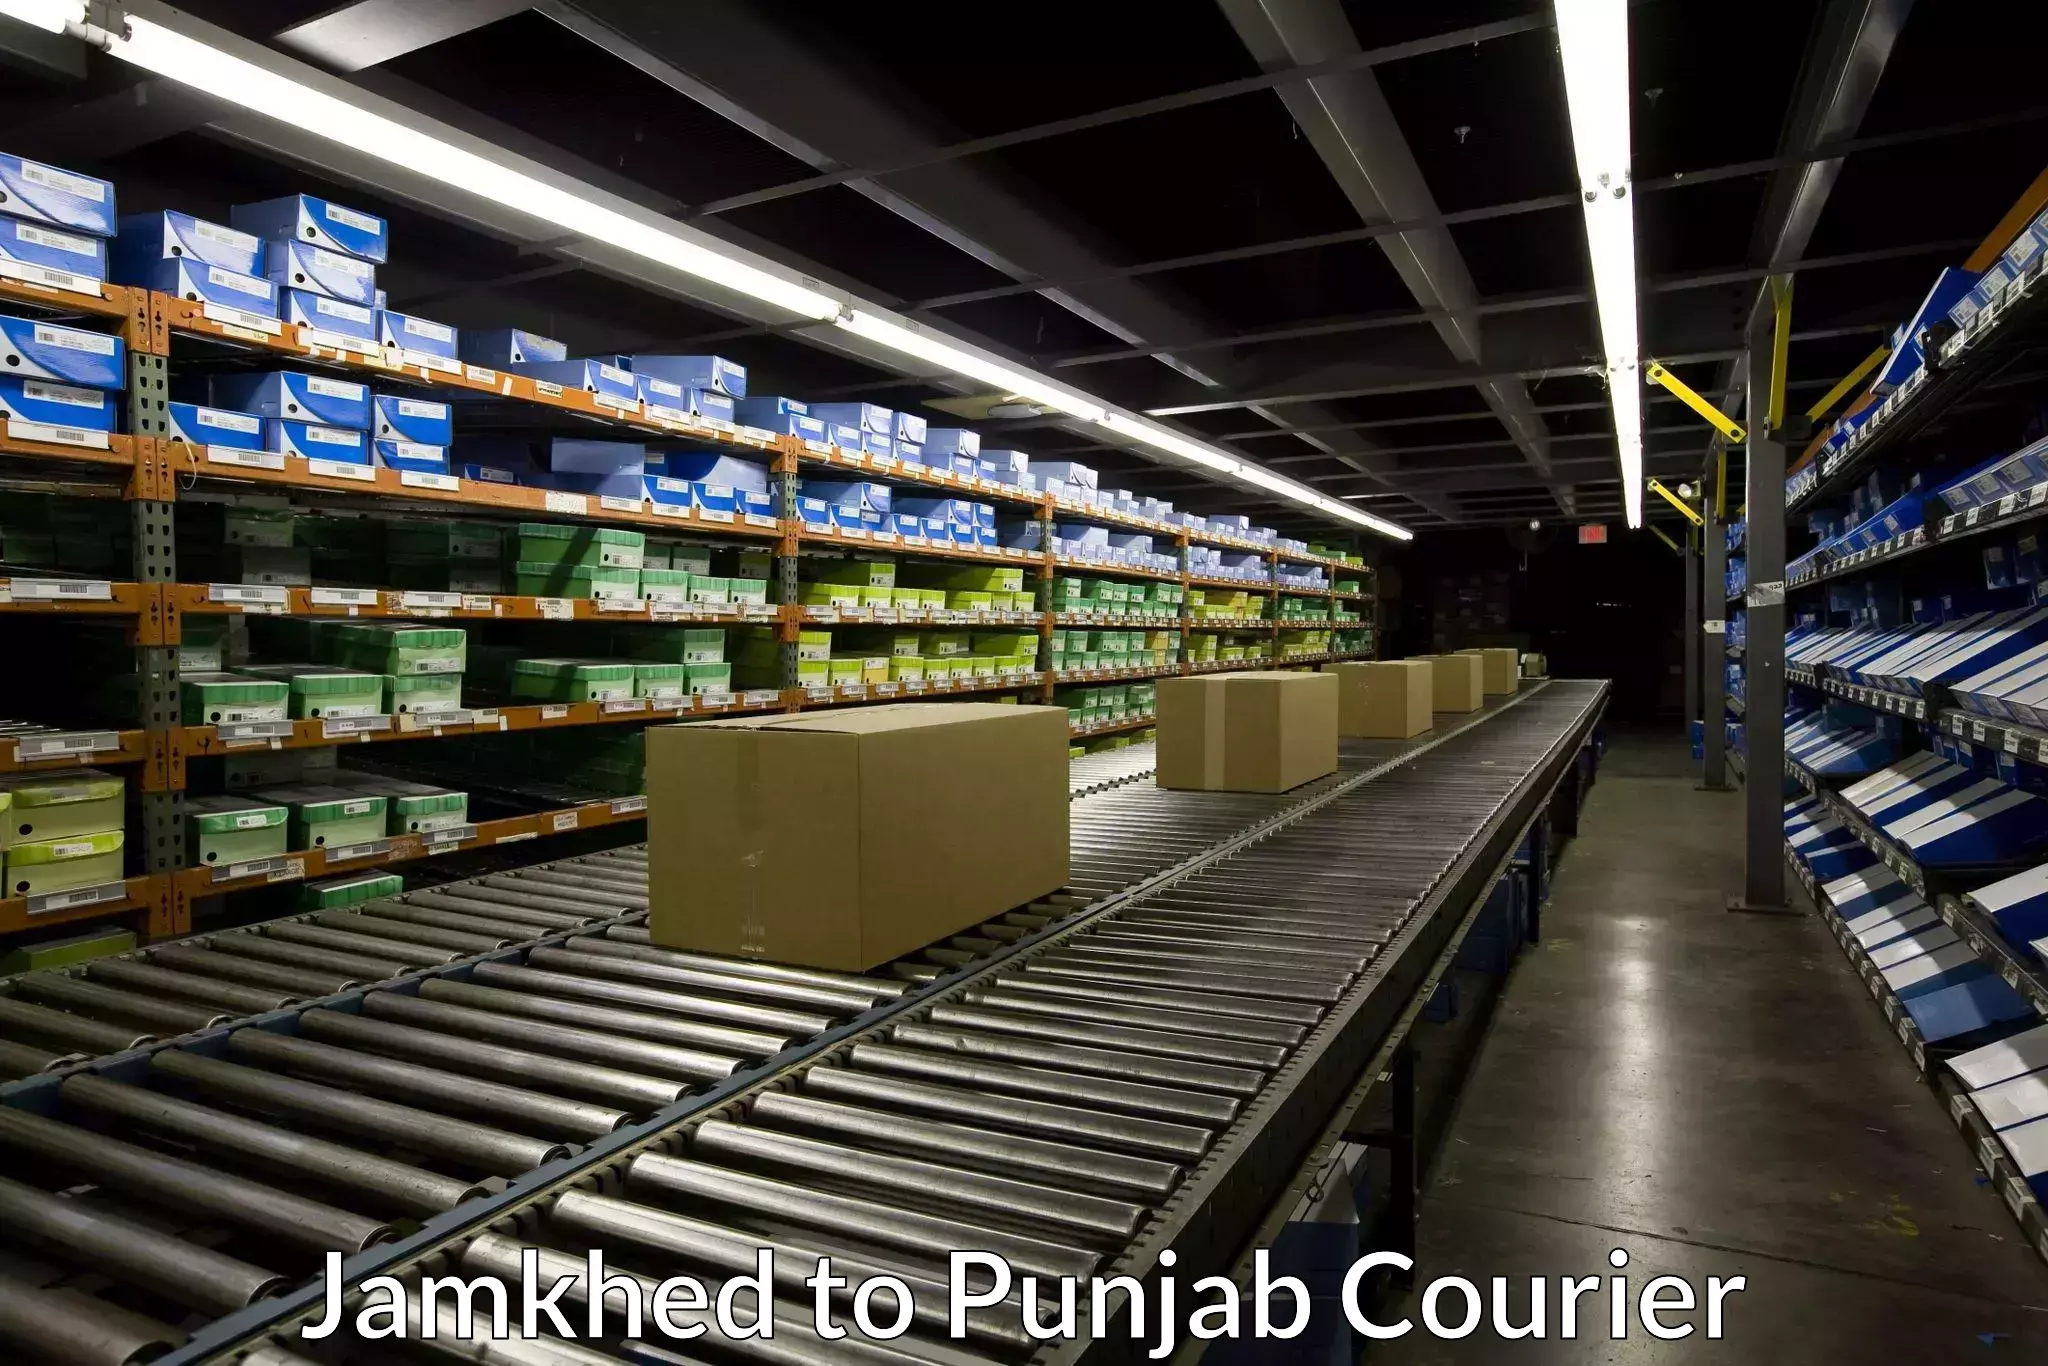 Courier service booking Jamkhed to Punjab